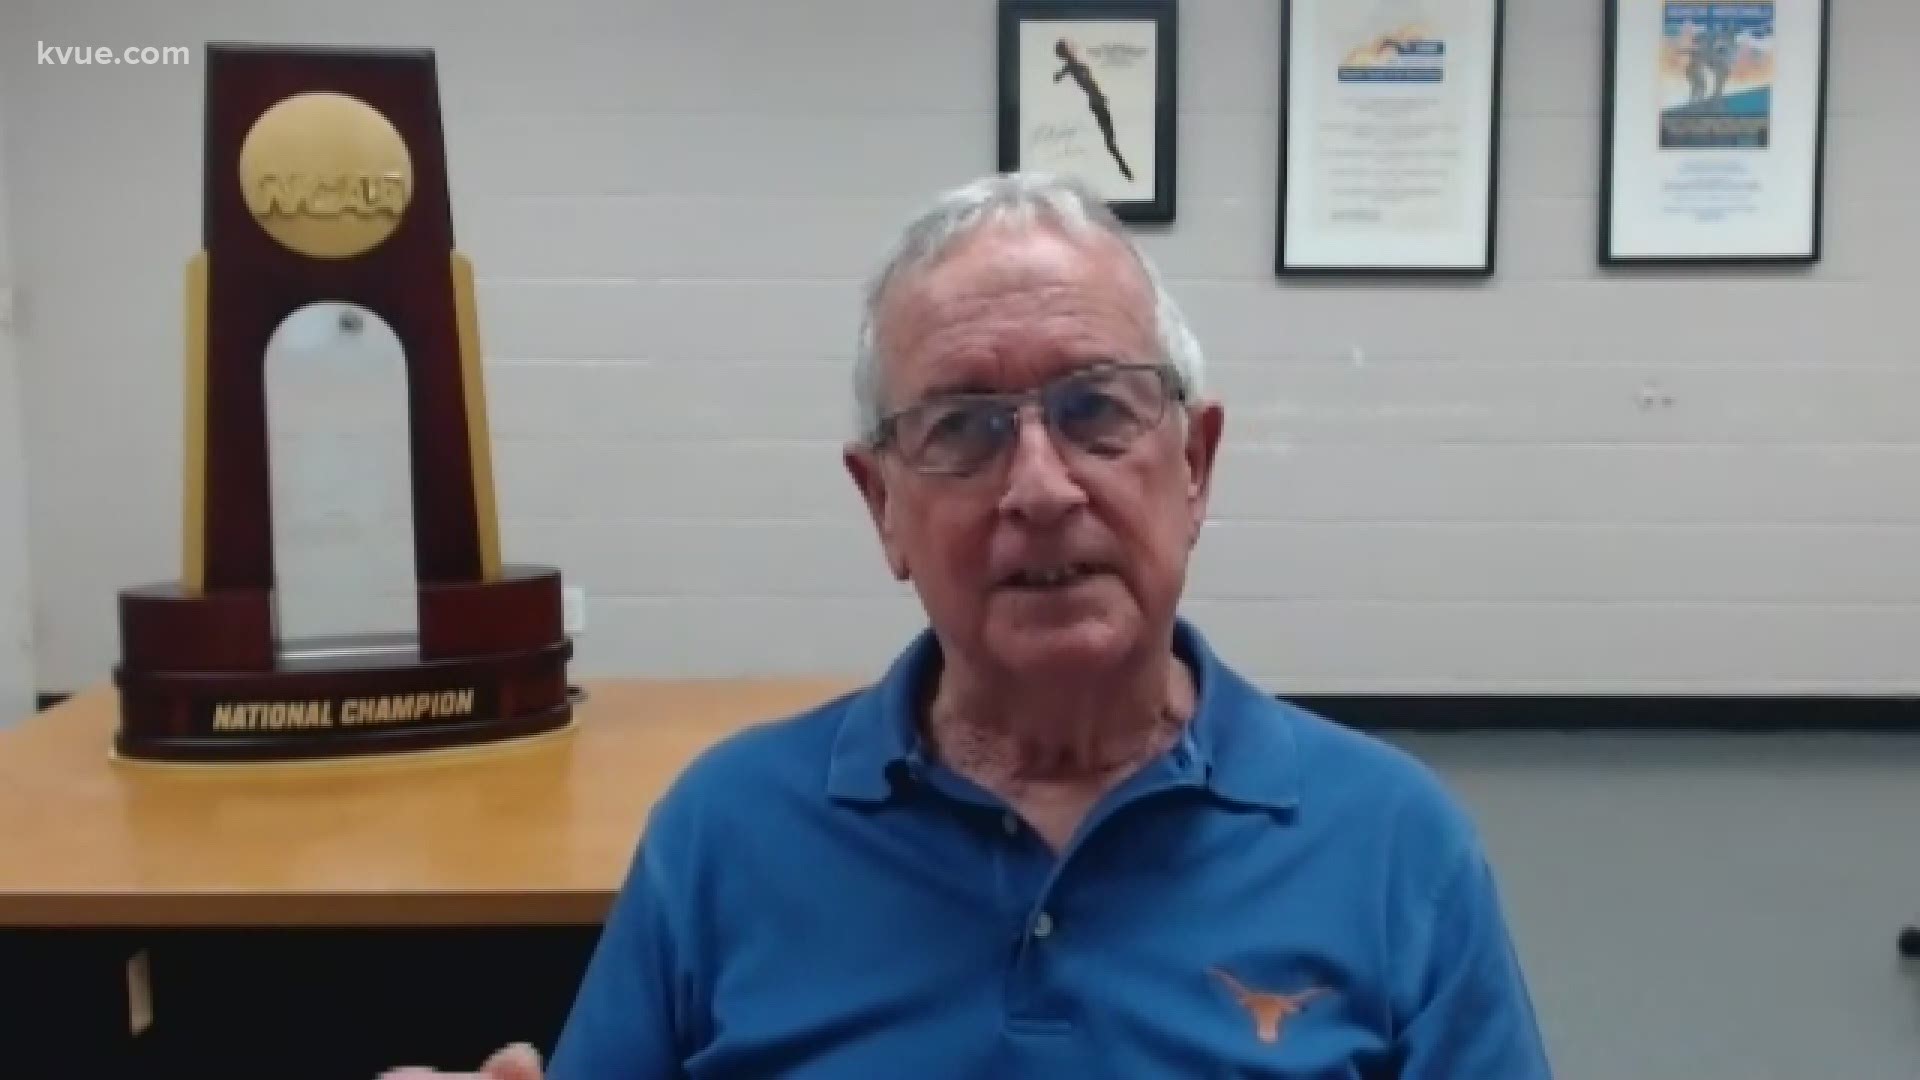 Texas Swimming & Diving head coach Eddie Reese is retiring after 43 years at UT.